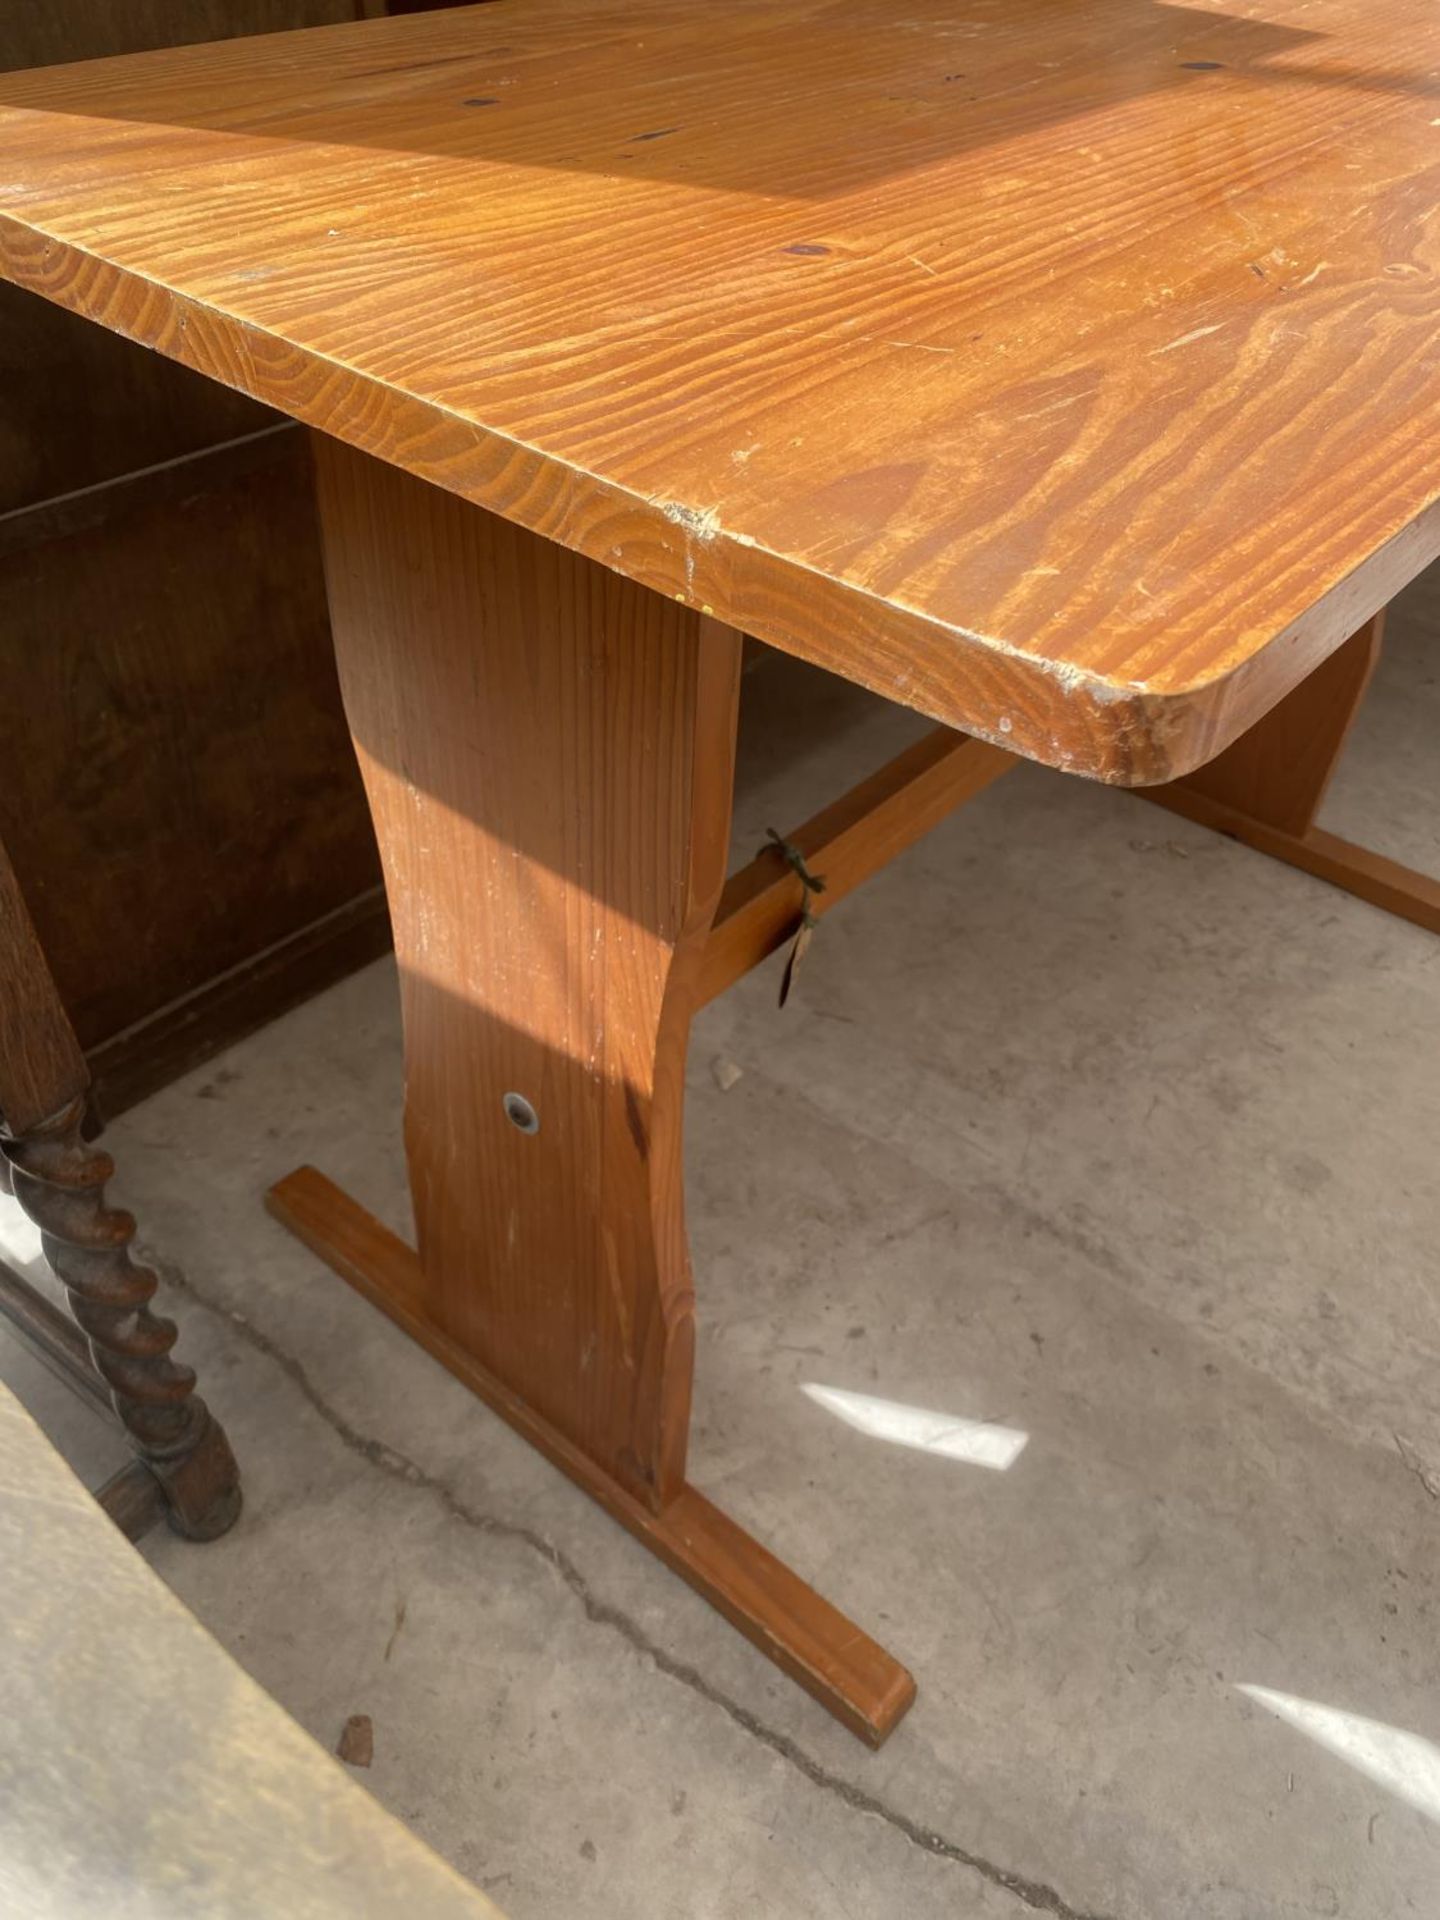 A MODERN PINE KITCHEN TABLE, 44.5X23.5" - Image 3 of 4